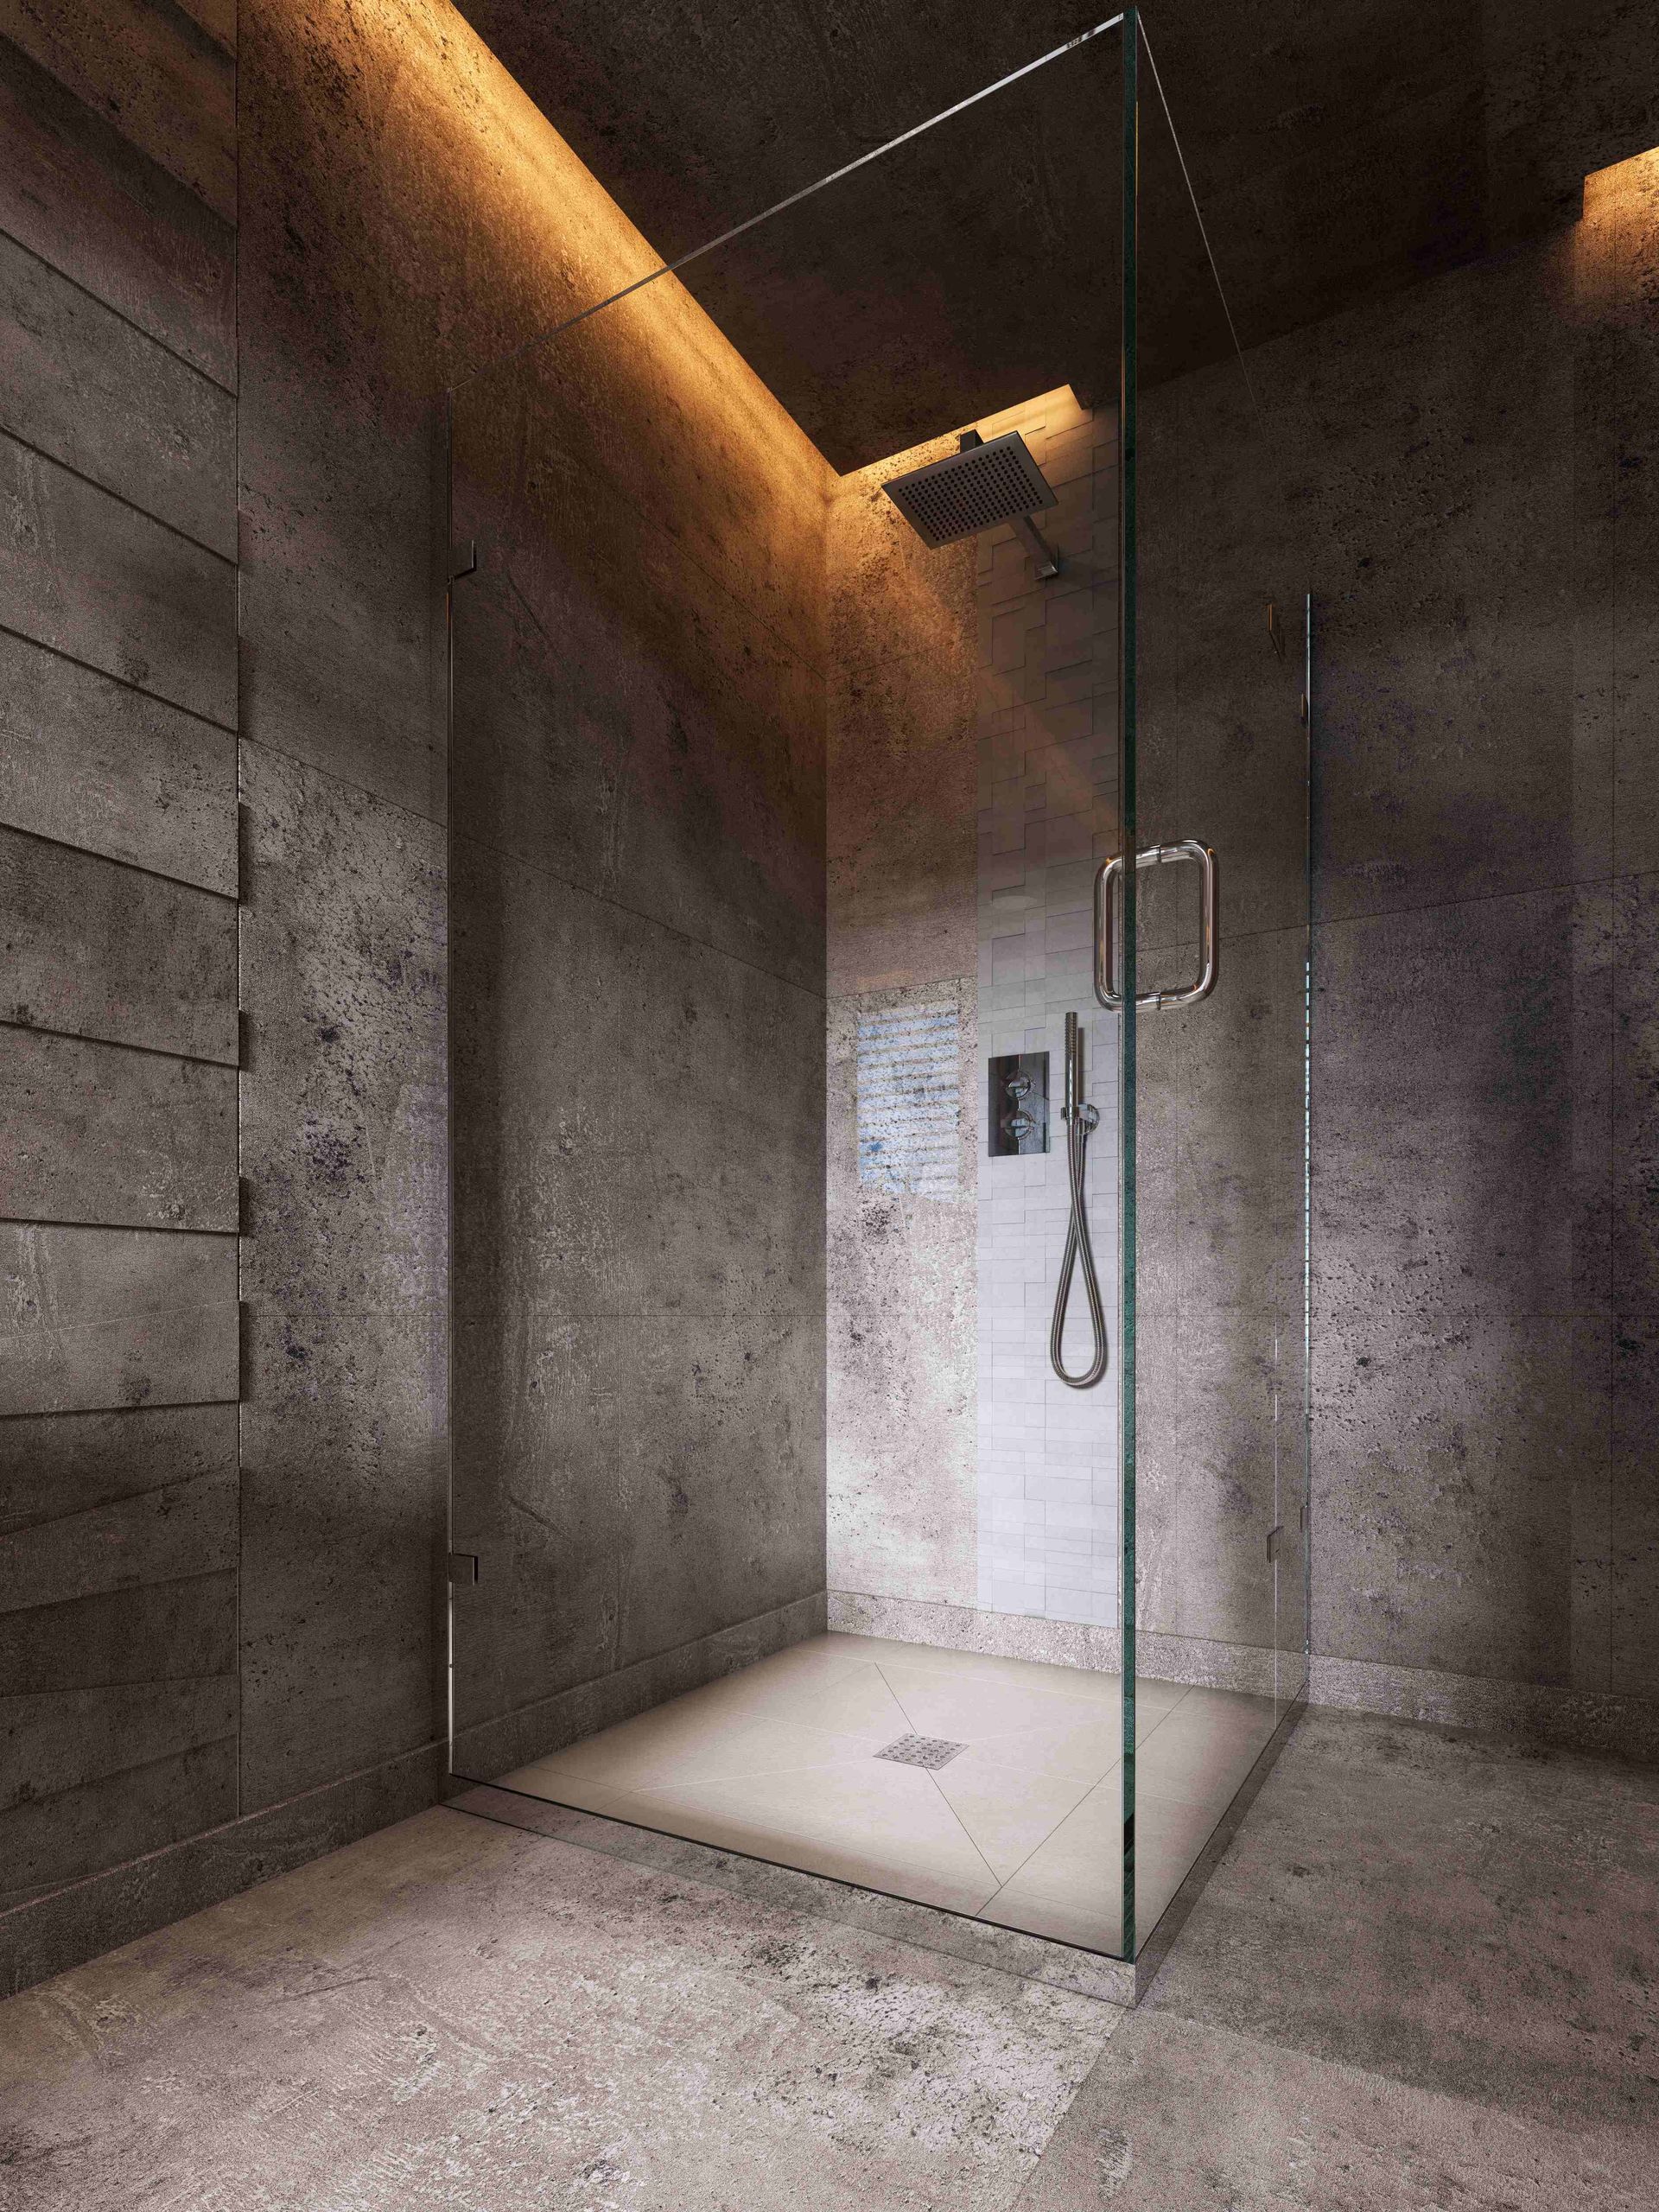 Awesome-looking new shower with enclosure